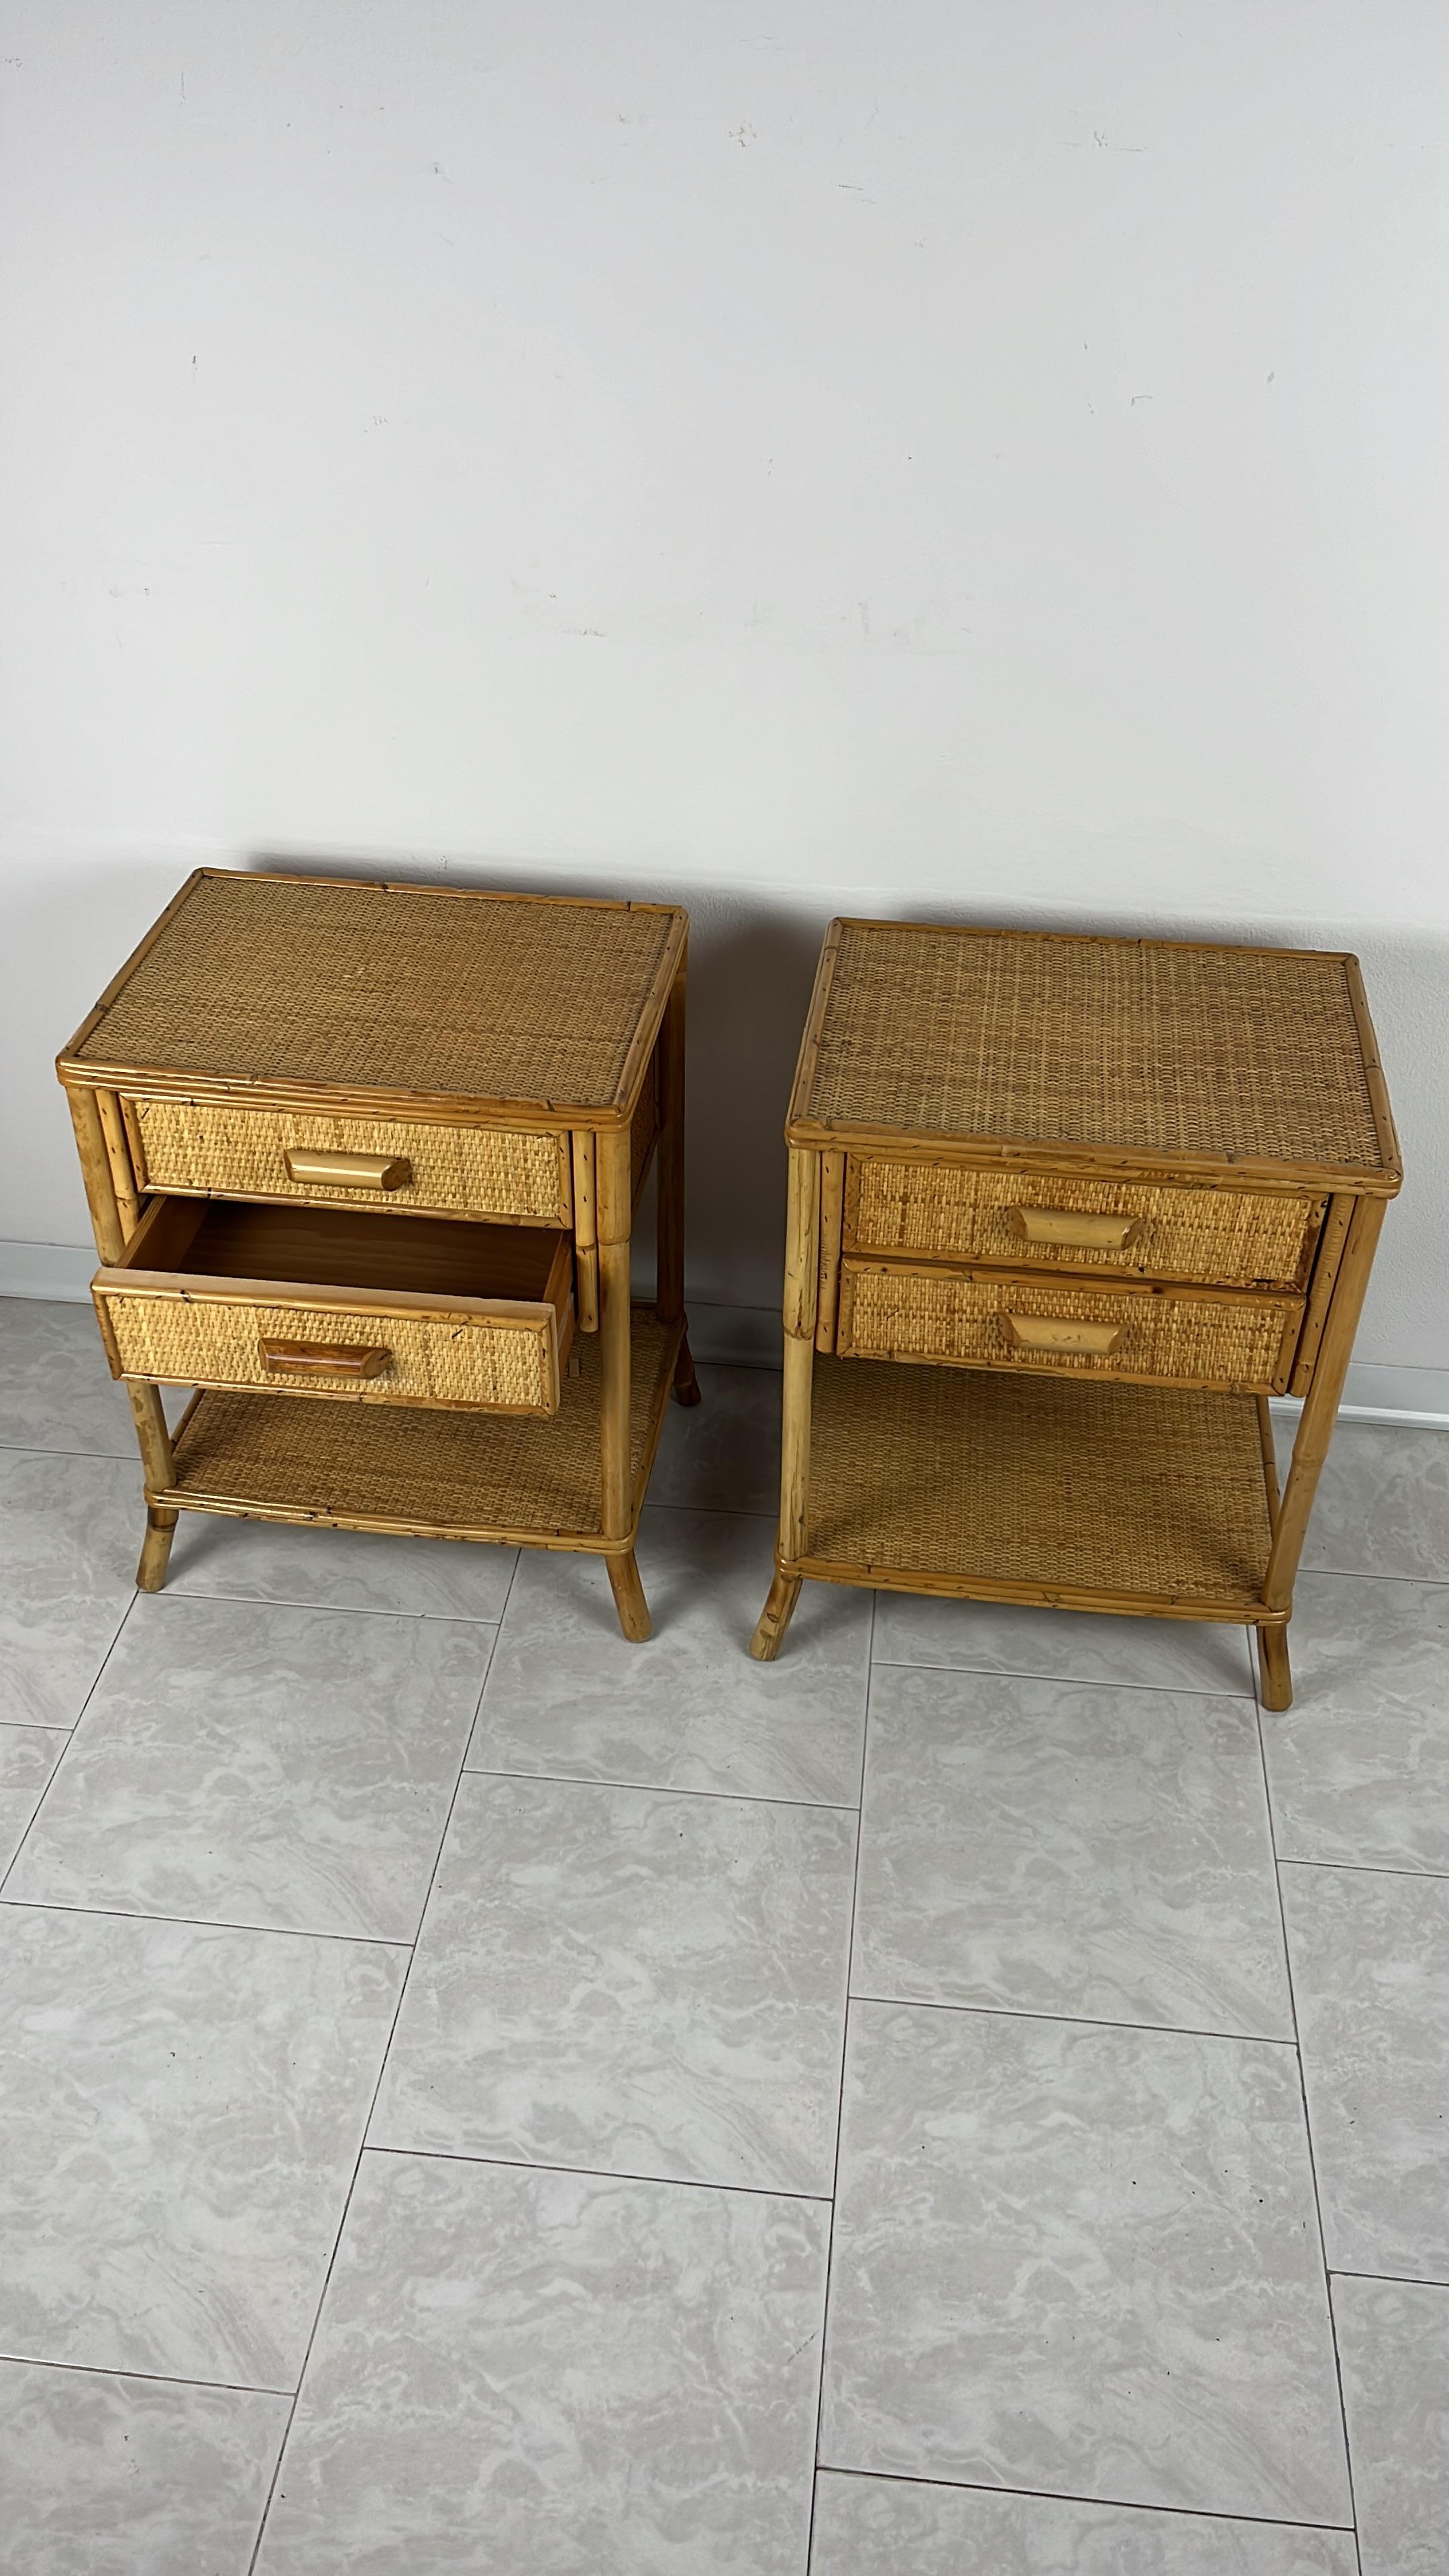 Pair of Vintage Italian Bamboo and Rattan Bedside Tables 1970s For Sale 3